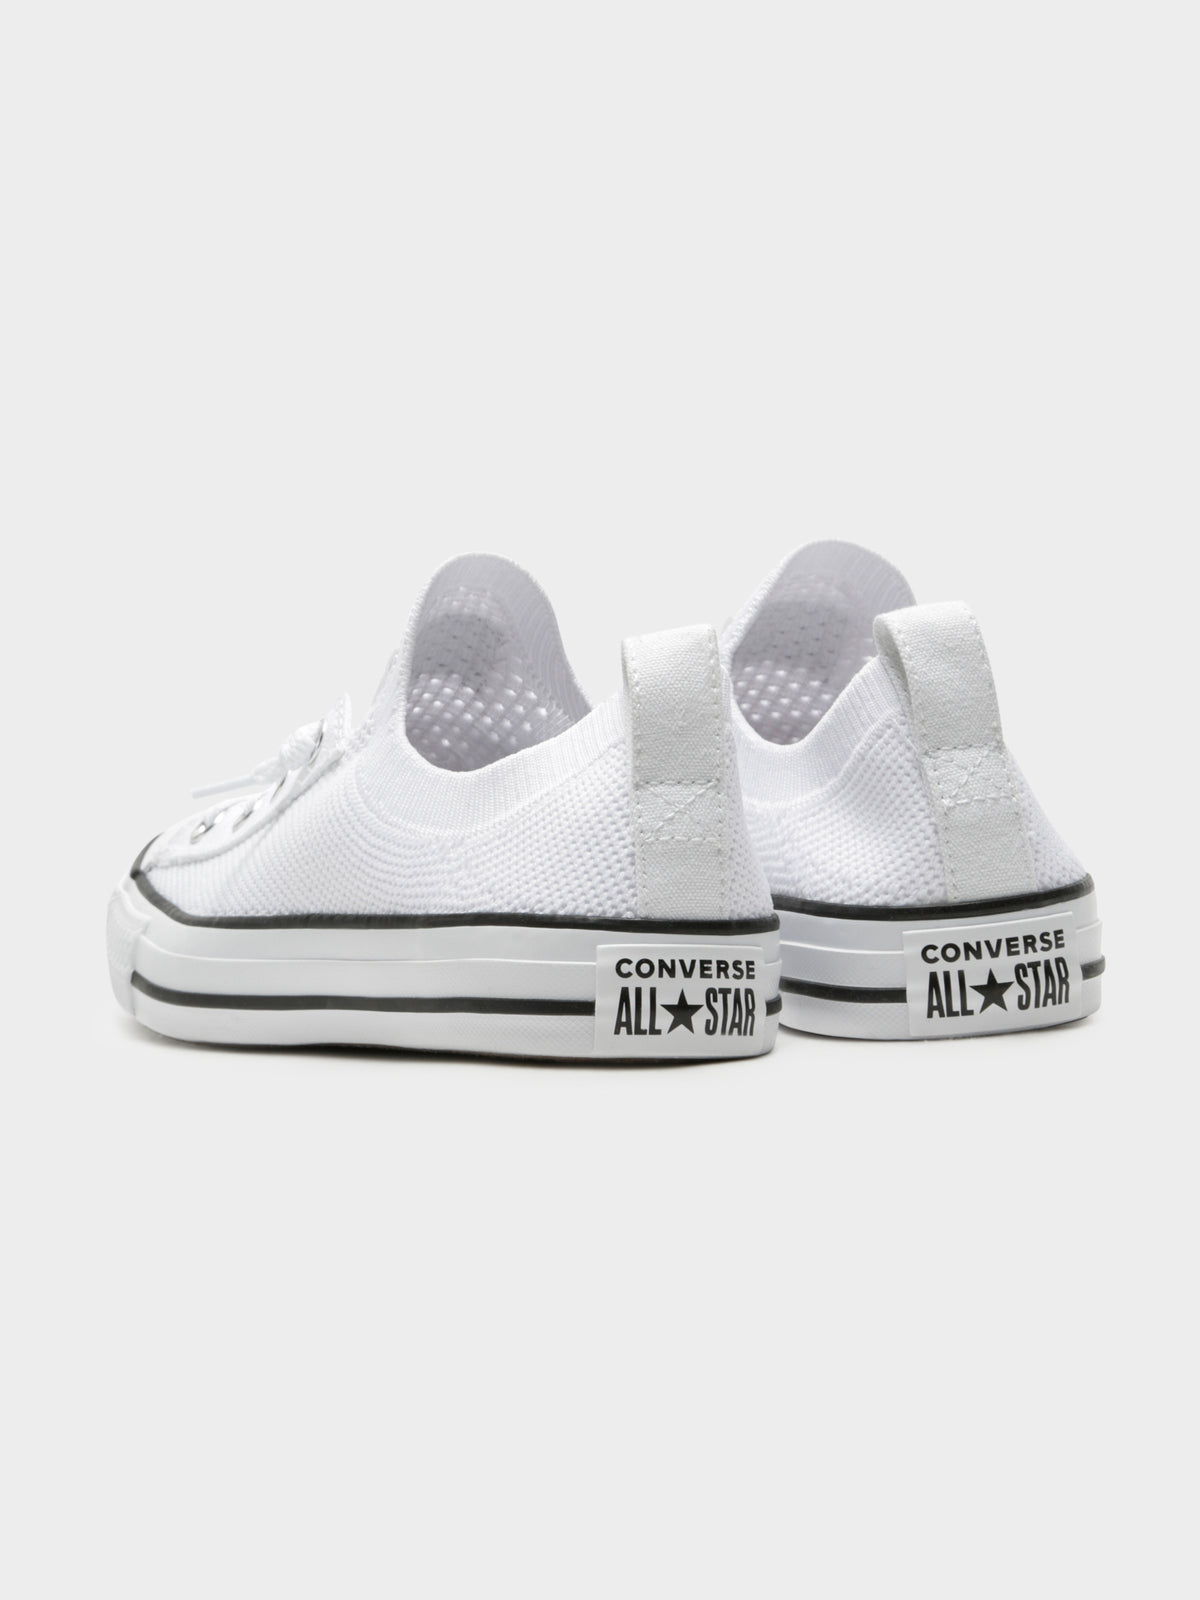 Chuck Taylor All Star Shoreline Knit Slip-On Sneakers in White